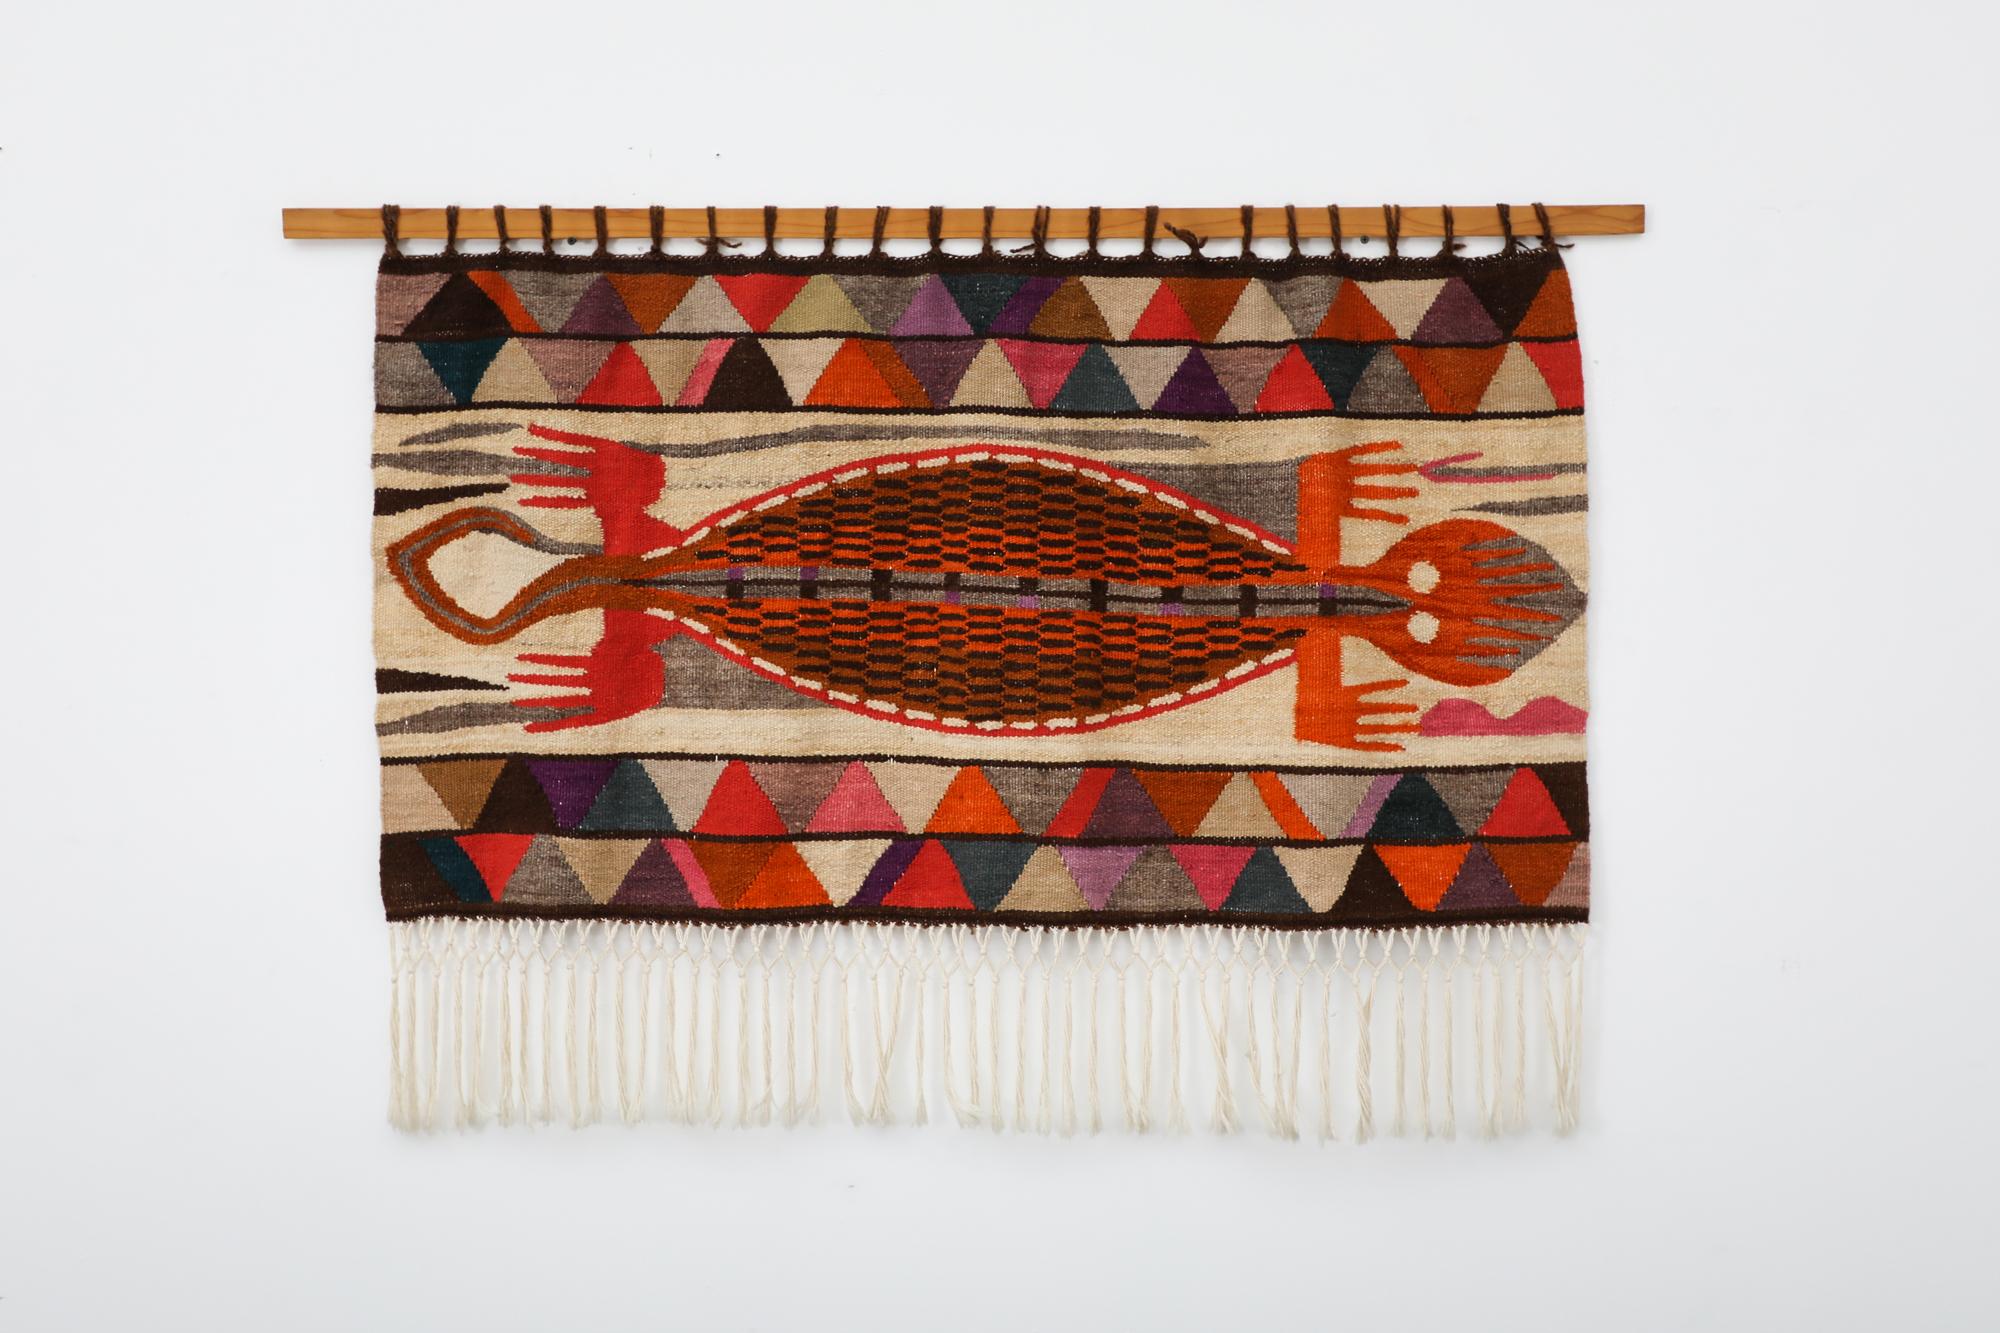 Woven wool tapestry with primitive design made from Ecuador. This Salasaca piece, named after the small Equadorian town known for its exquisite tapestries, is part of a long standing tradition where the colorful, loom-woven designs  were hand dyed